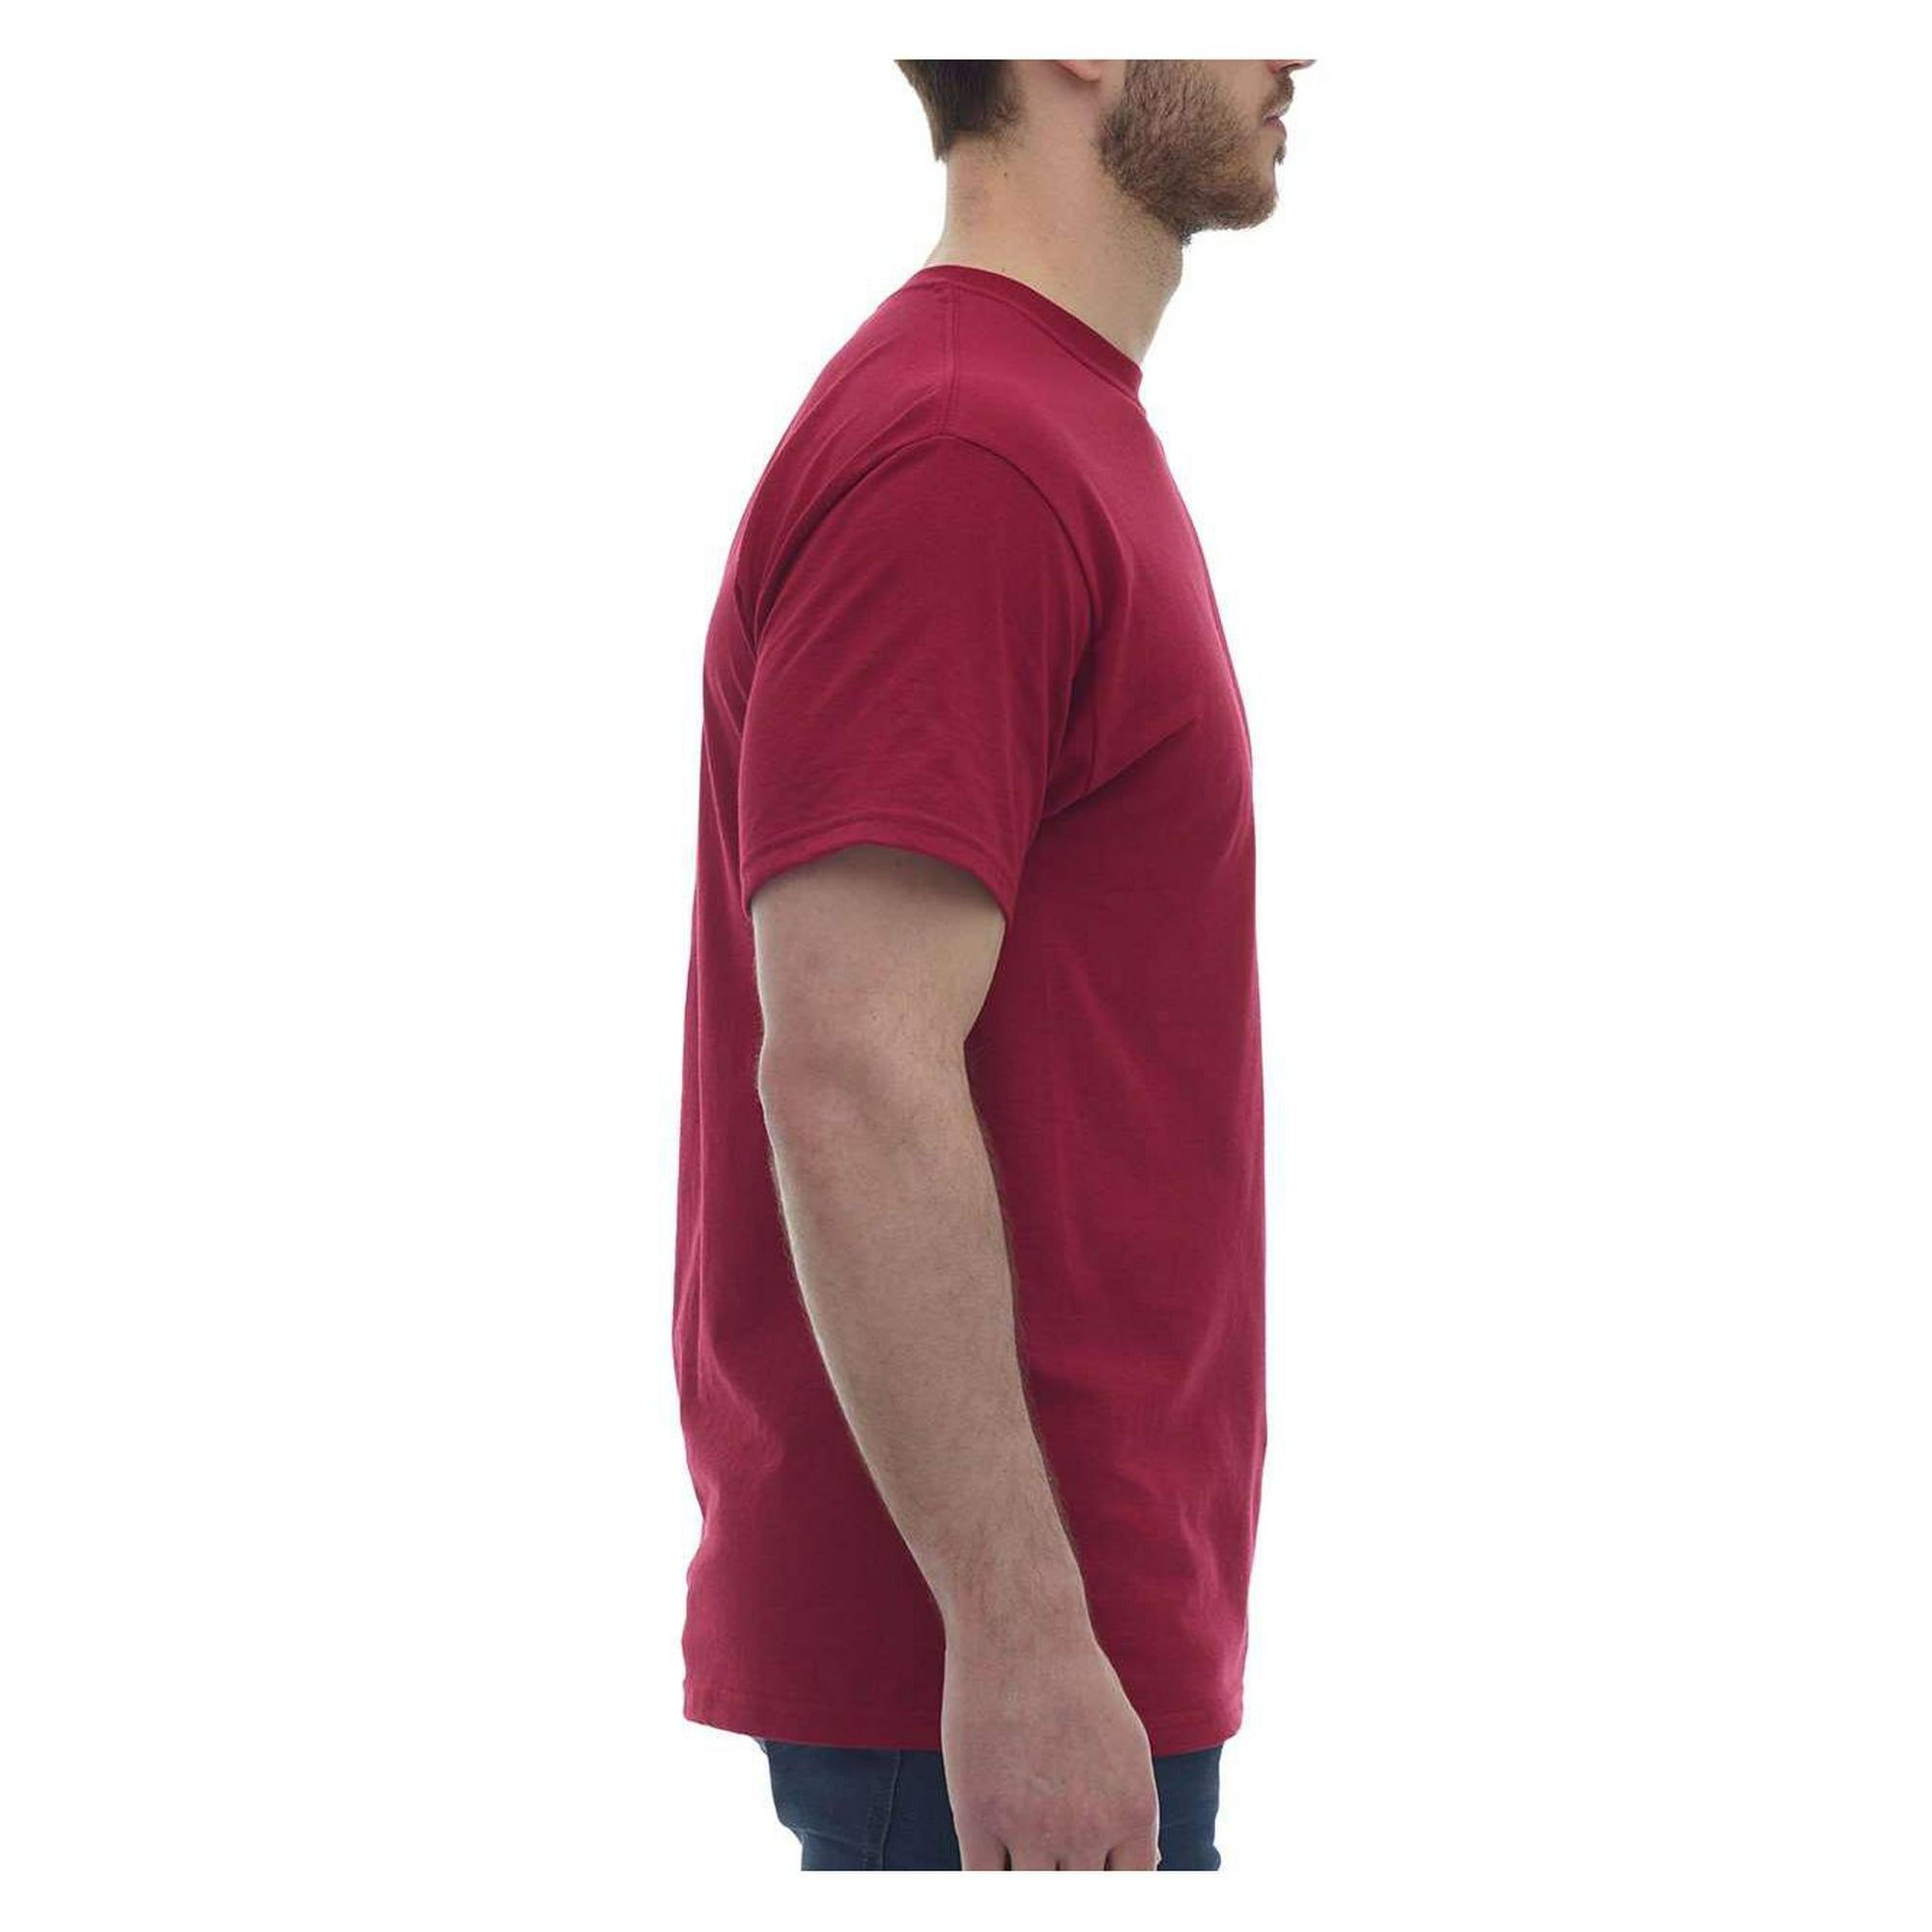 M&o 4800 - Gold Soft Touch T-Shirt - Cardinal Red S 